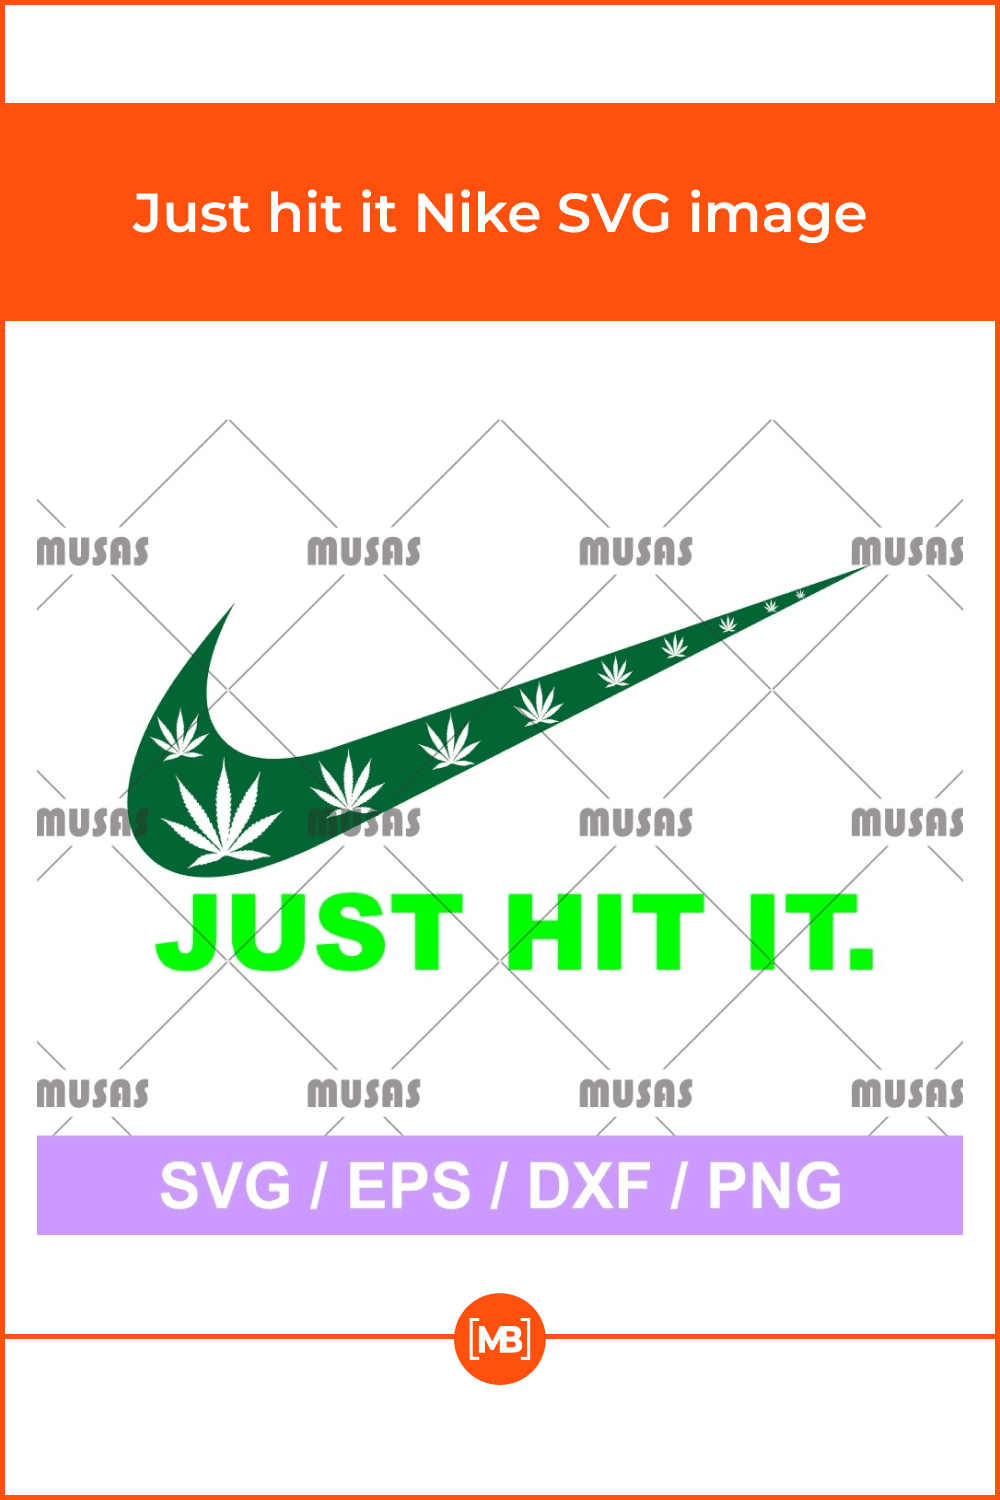 Just hit it Nike SVG image.